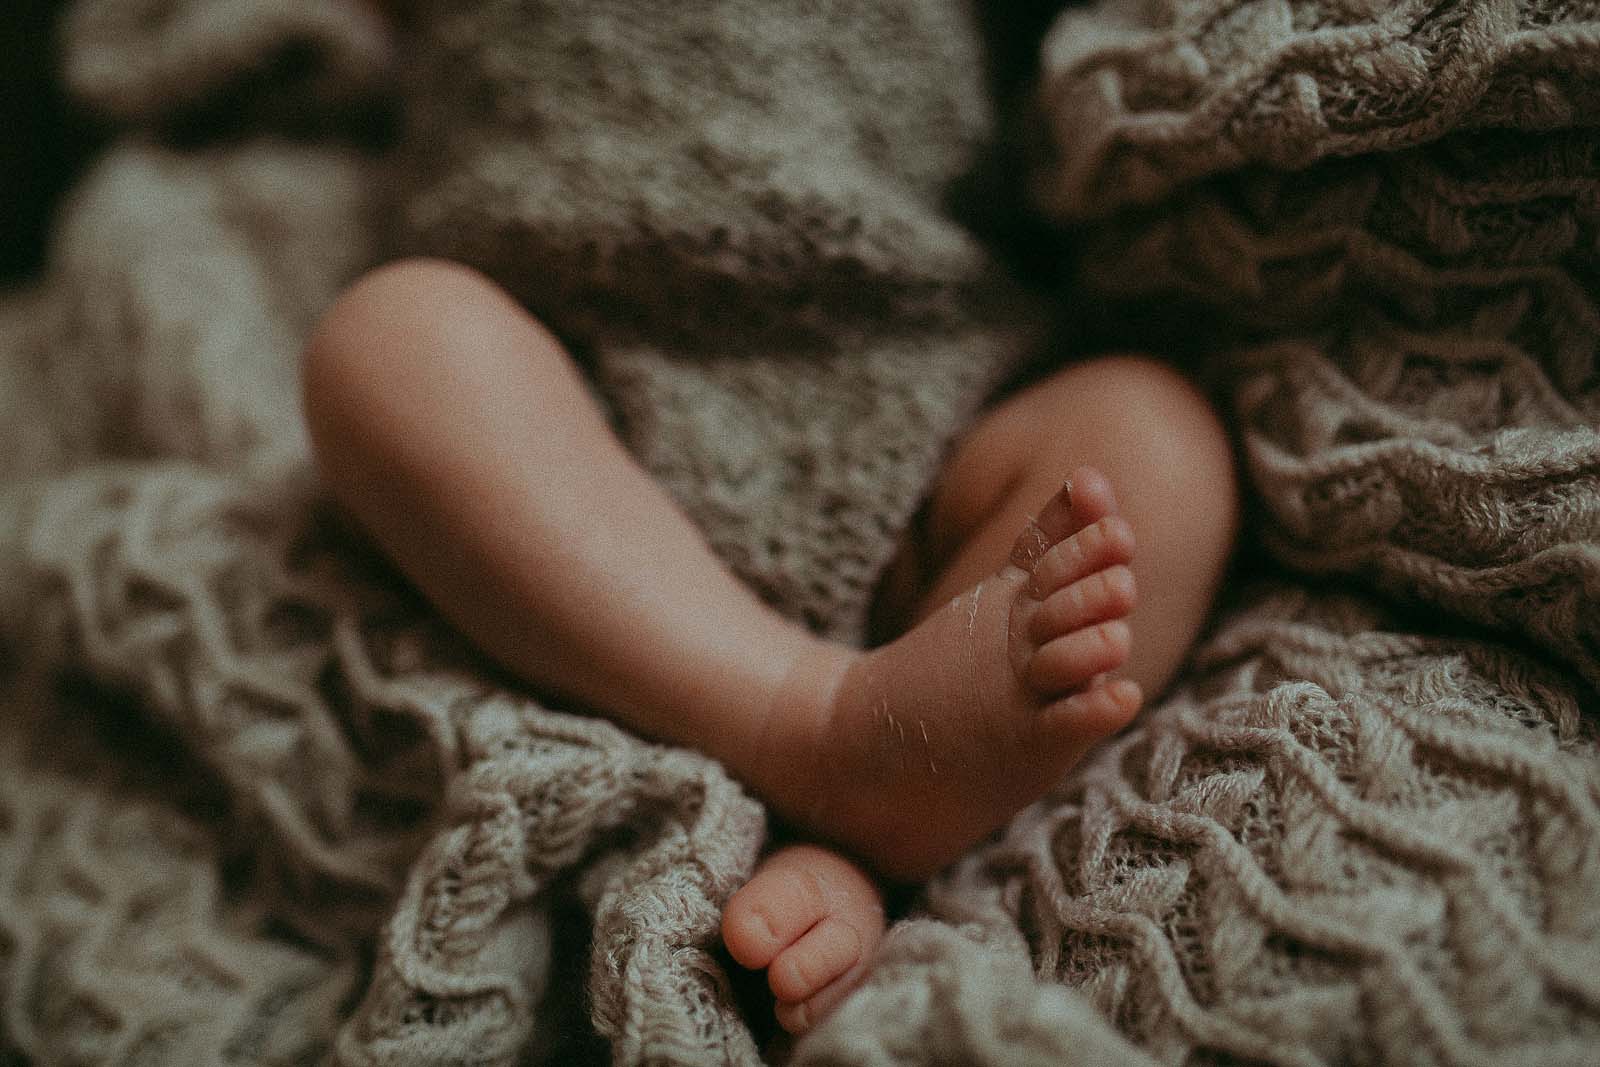 Criss-cross newborn baby's legs with flaky skin swaddled in cozy knitted grey blanket. Baby photo session took place at Victoria Vasilyeva Photography Studio in Apex NC